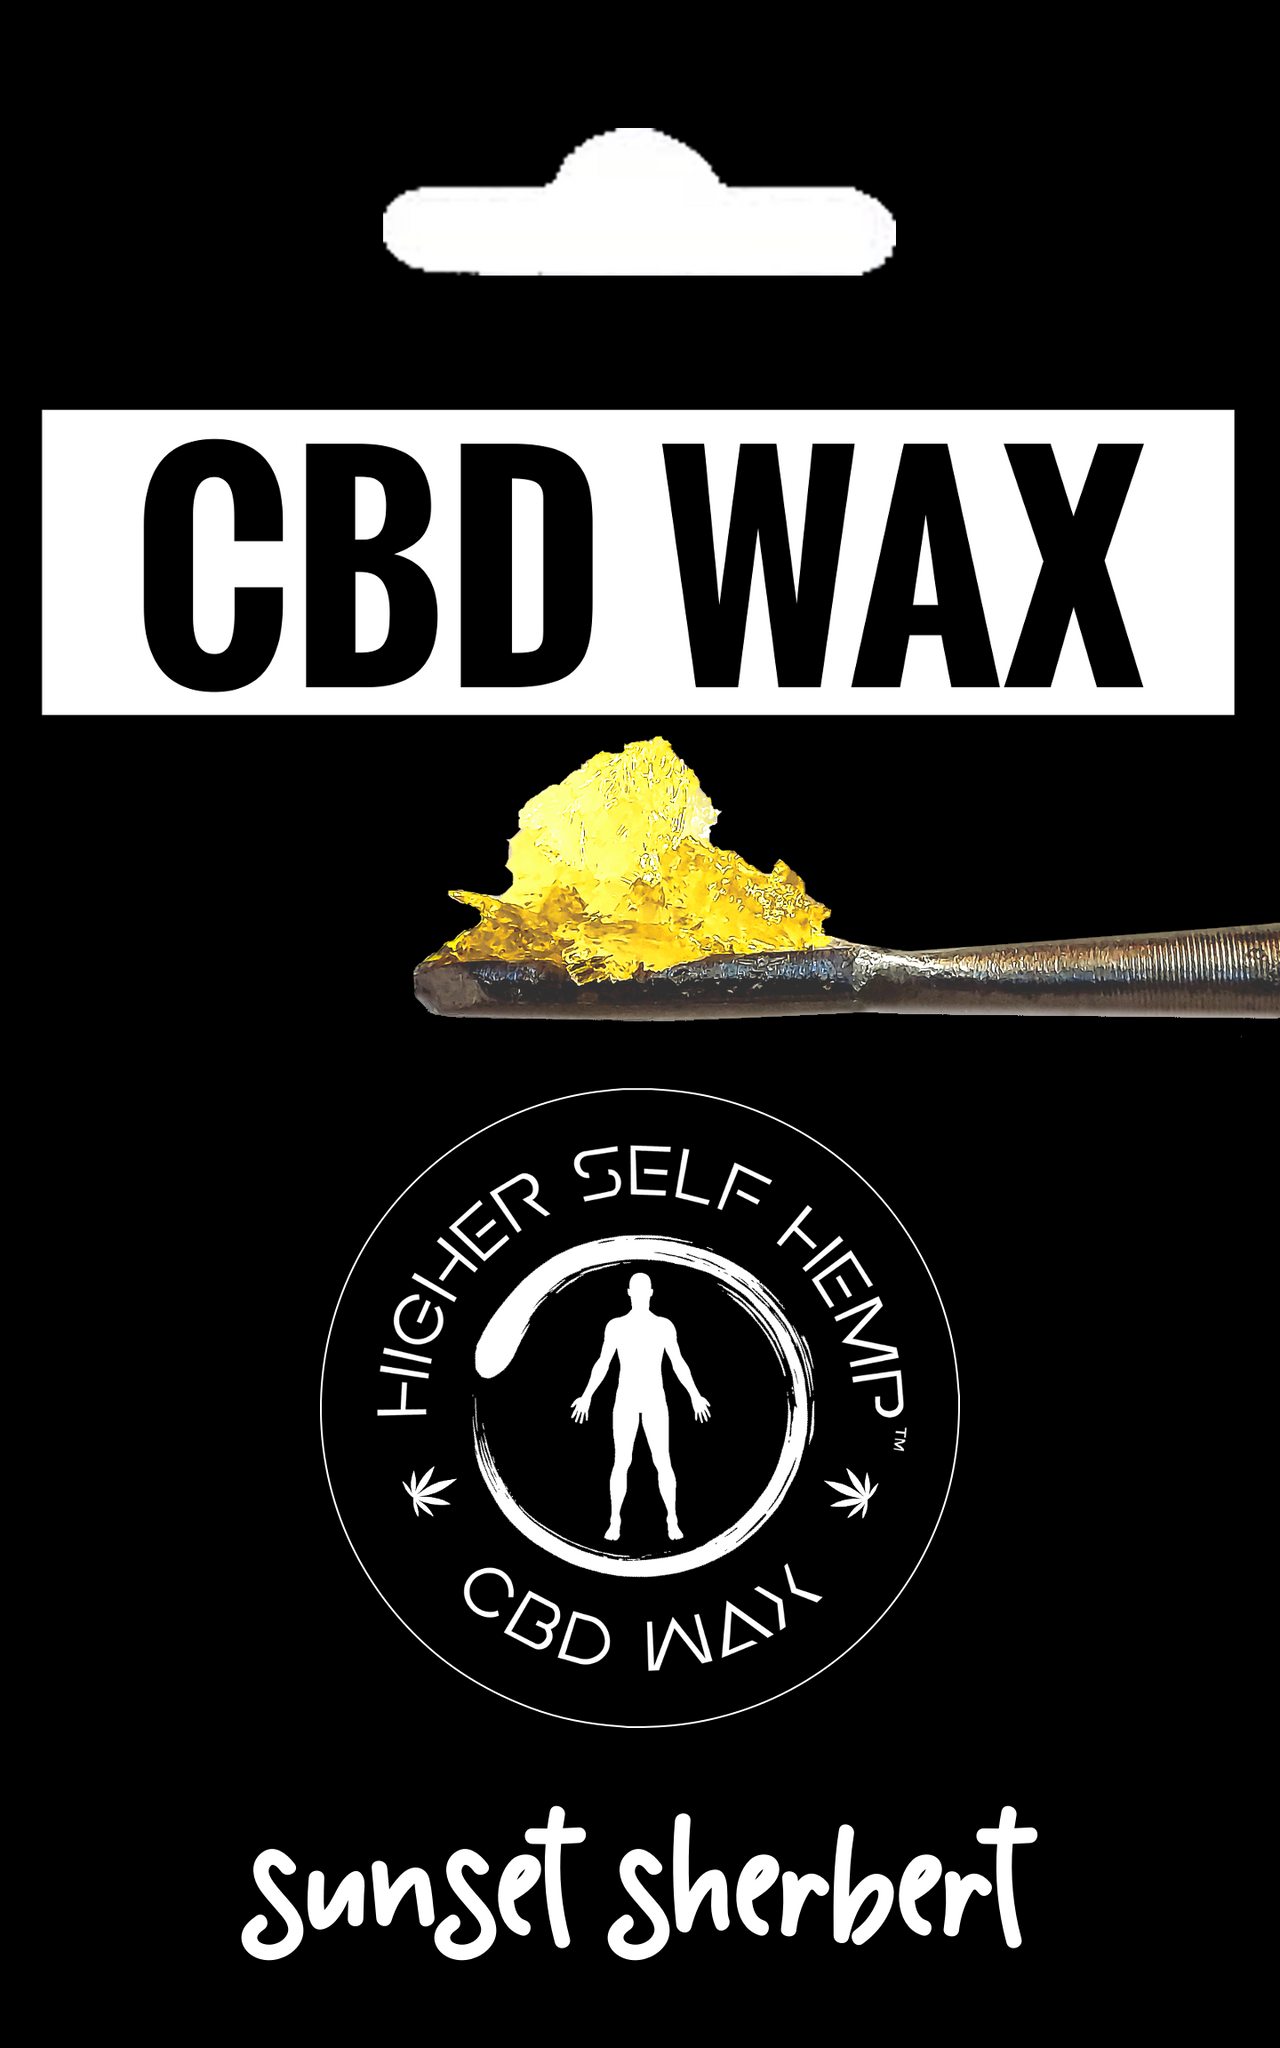 CBD Dabs: What are they and how to take them